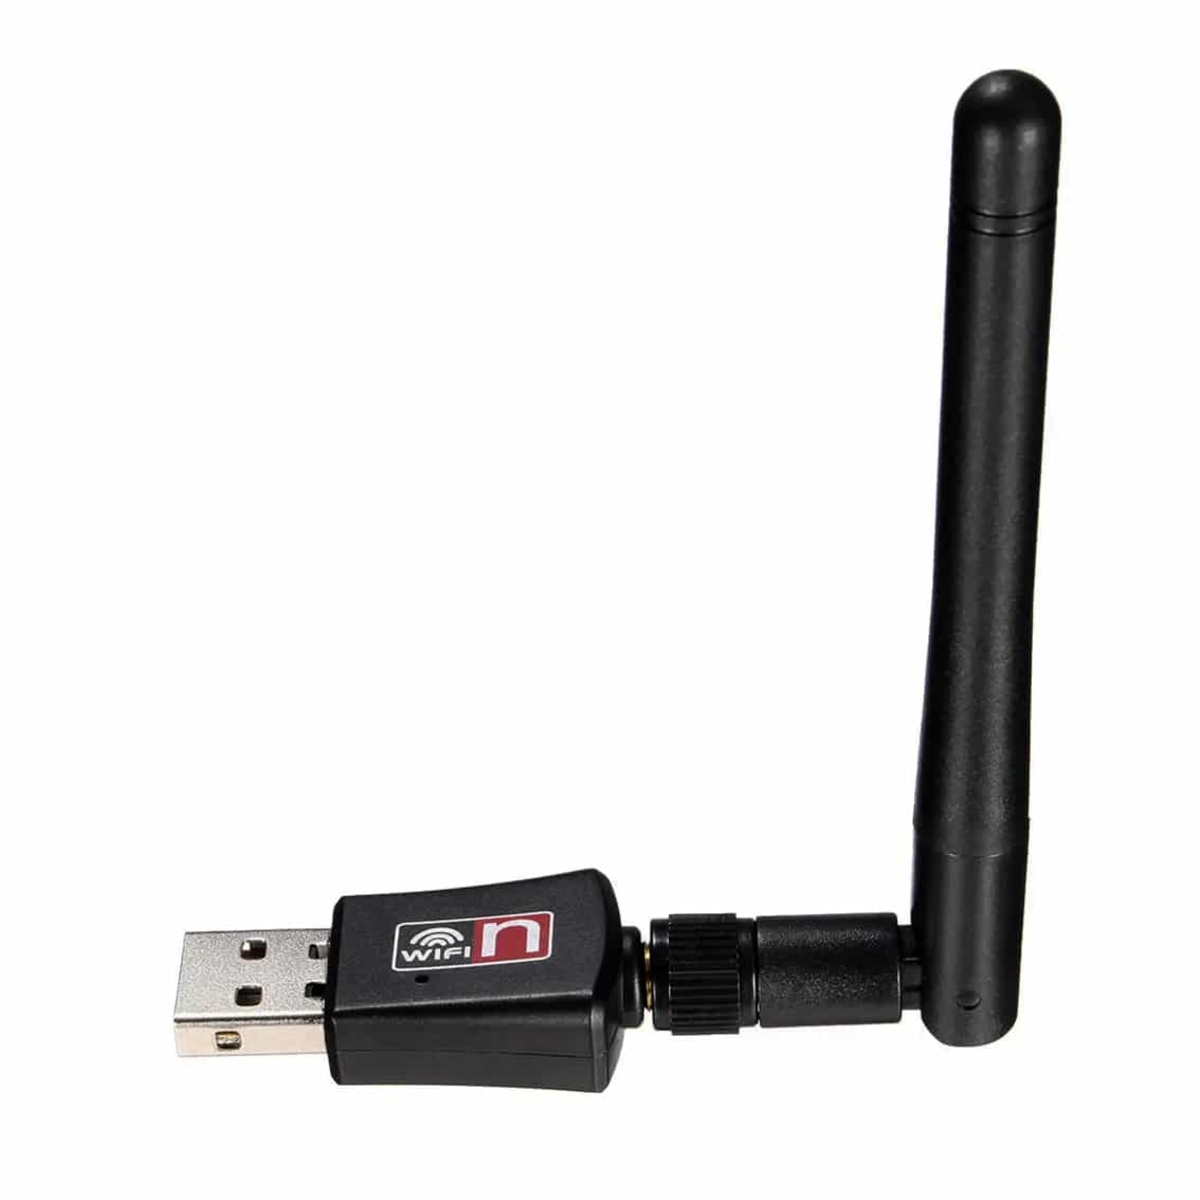 How To Install Usb Wifi Adapter Without Cd